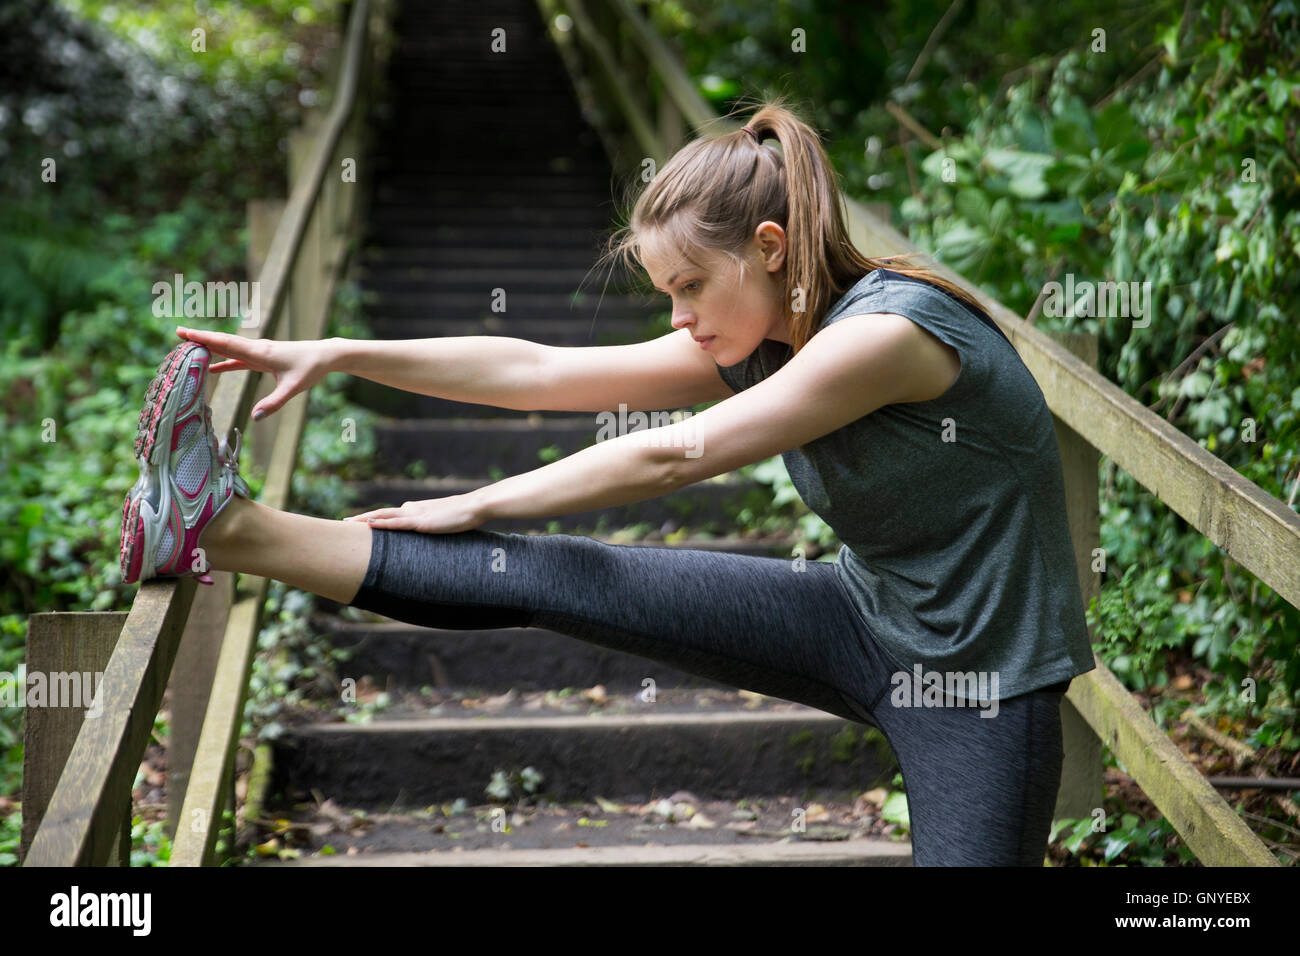 Woman stretching before running on a forest trail, training and exercising. Fitness healthy lifestyle concept with female athlet Stock Photo